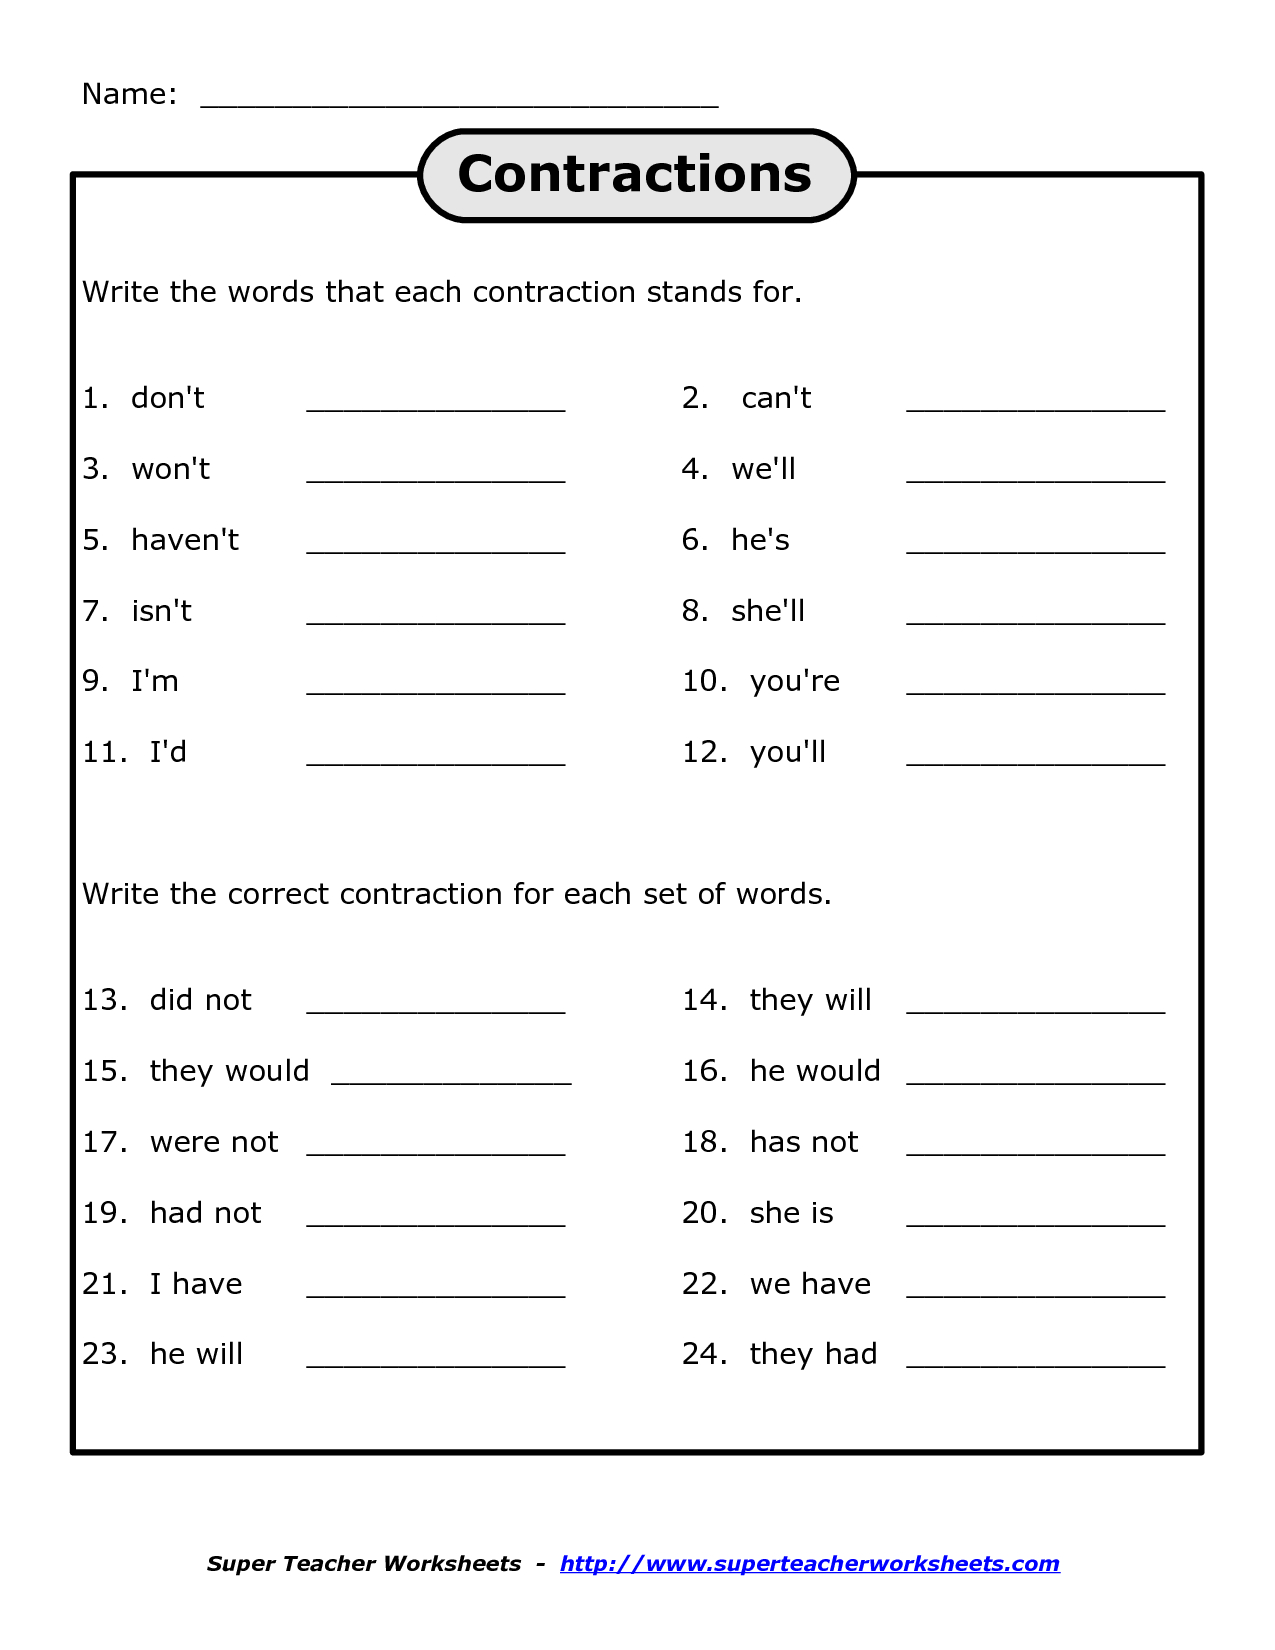 Free Printables For 4Th Grade Science | Free Printable Contraction - Free Printable Phonics Worksheets For 4Th Grade